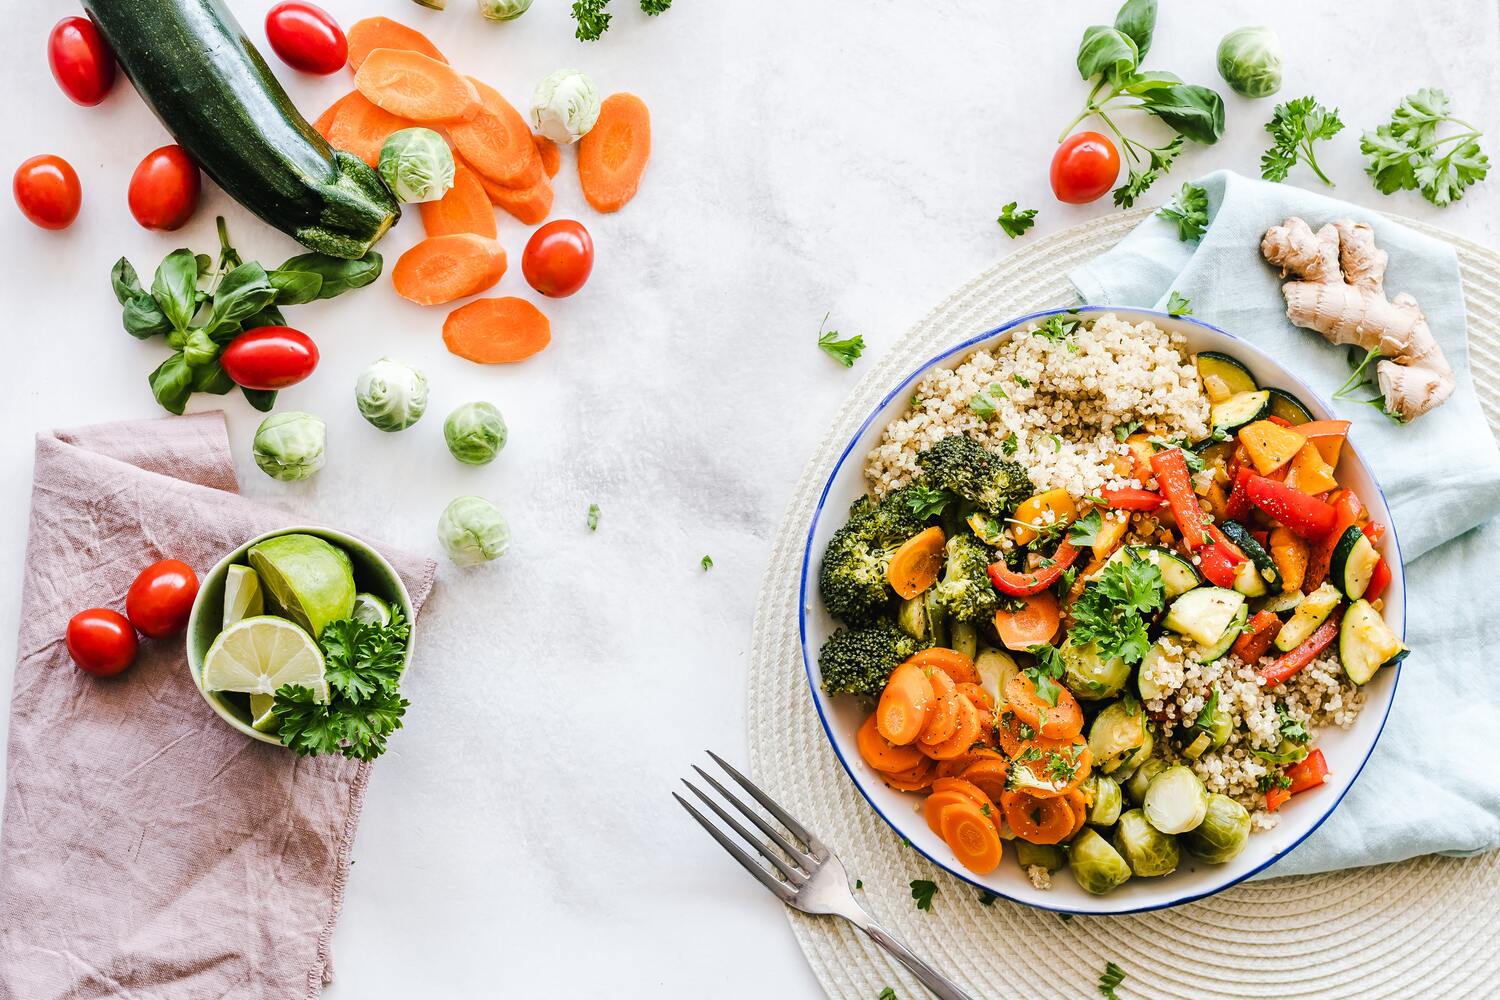 An image showing a bowl of quinoa and cooked vegetables, garnished with herbs, on a table surrounded by raw zucchini, carrots, brussels sprouts, cherry tomatoes, lime wedges, and a fork beside the bowl.